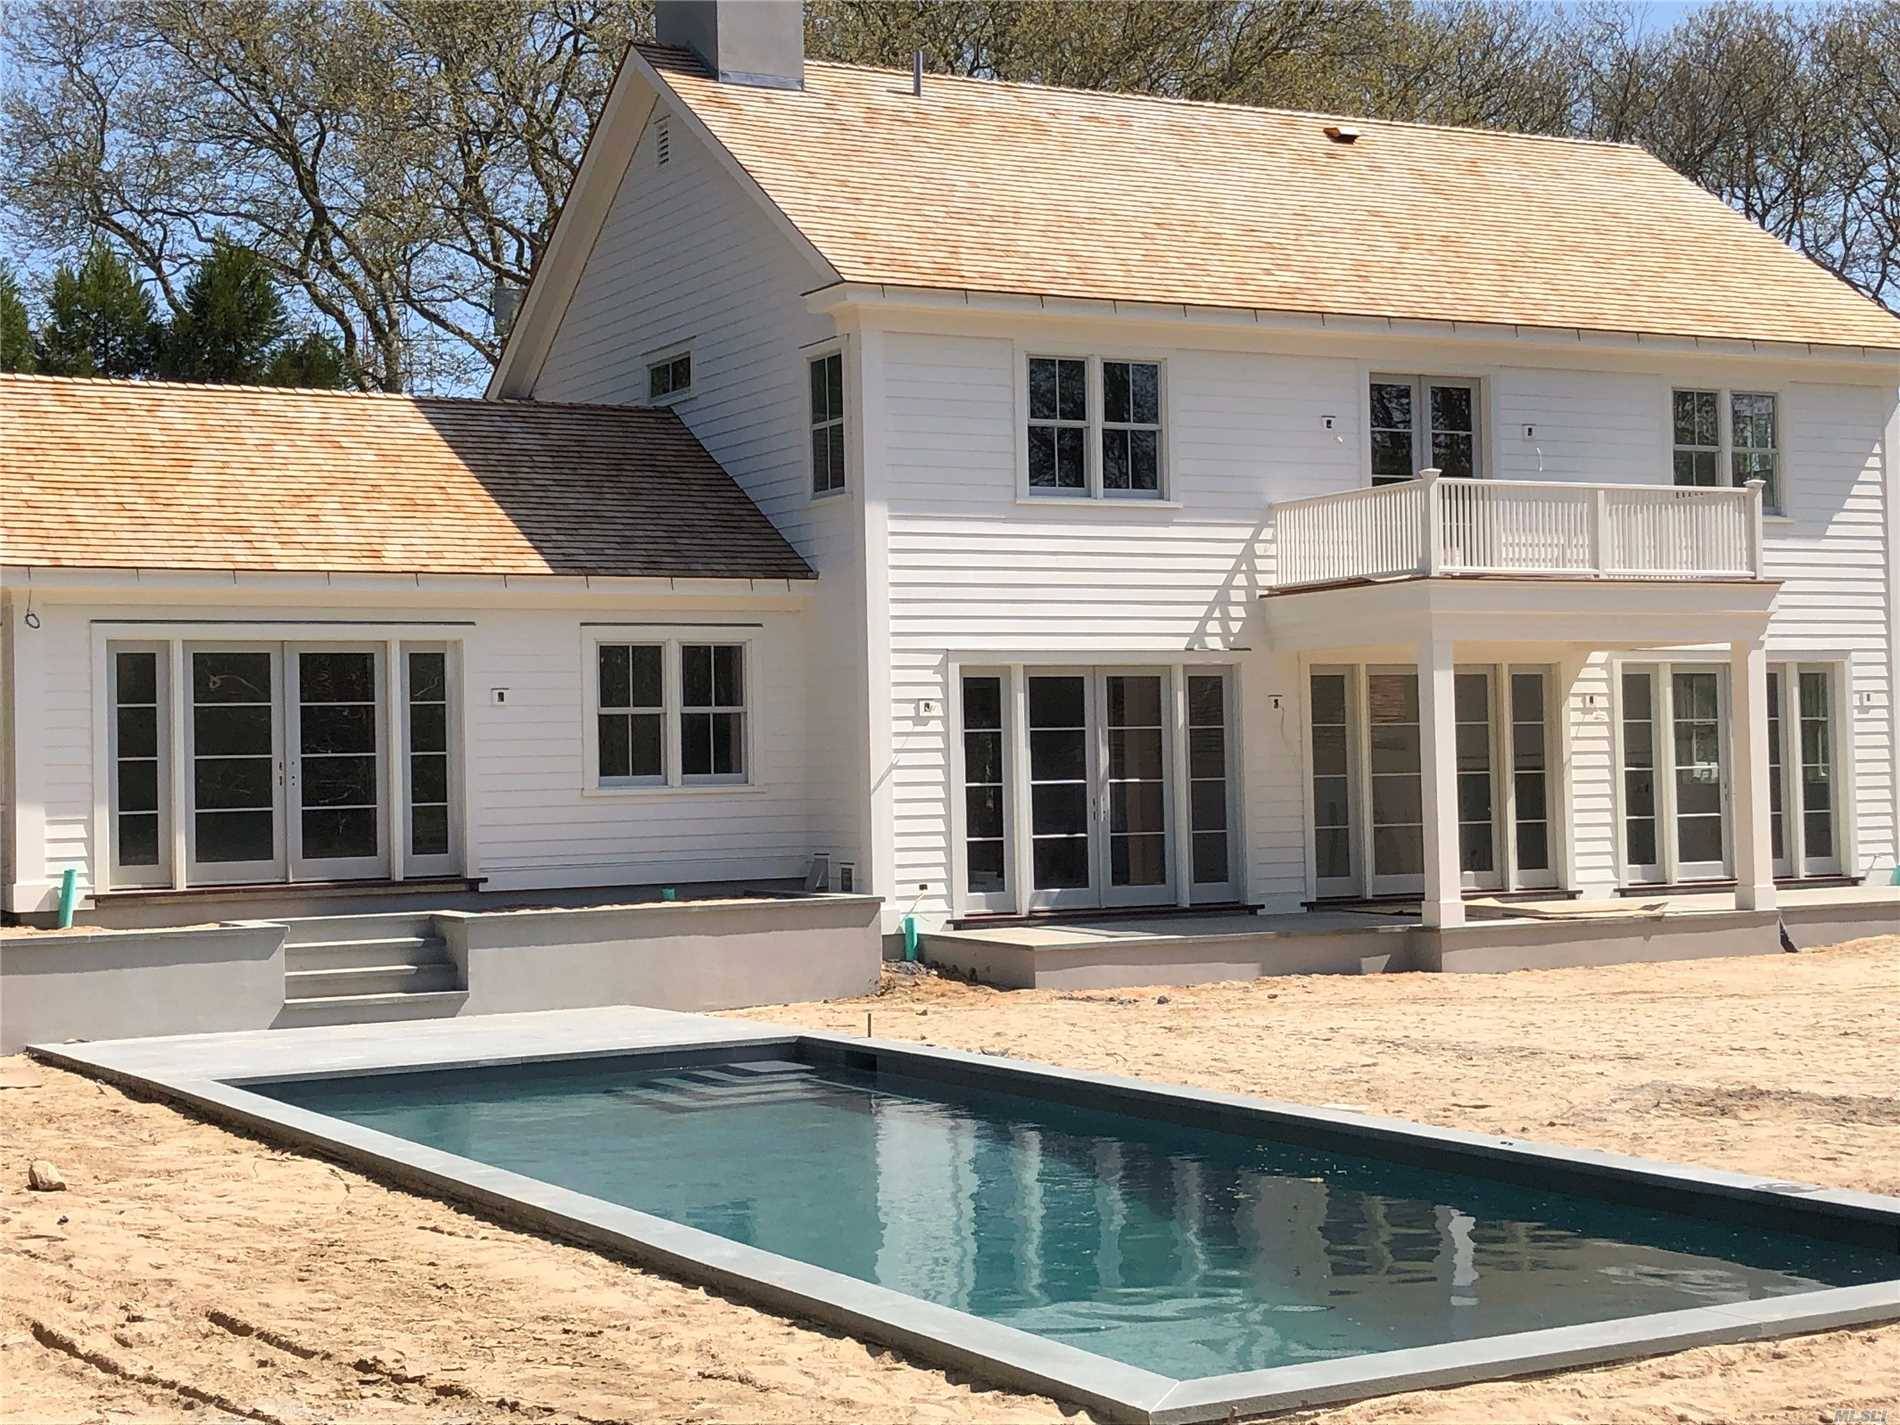 Incredible New Construction in East Hampton Village The 4600 SqFt house has 7 bedrooms, 5.